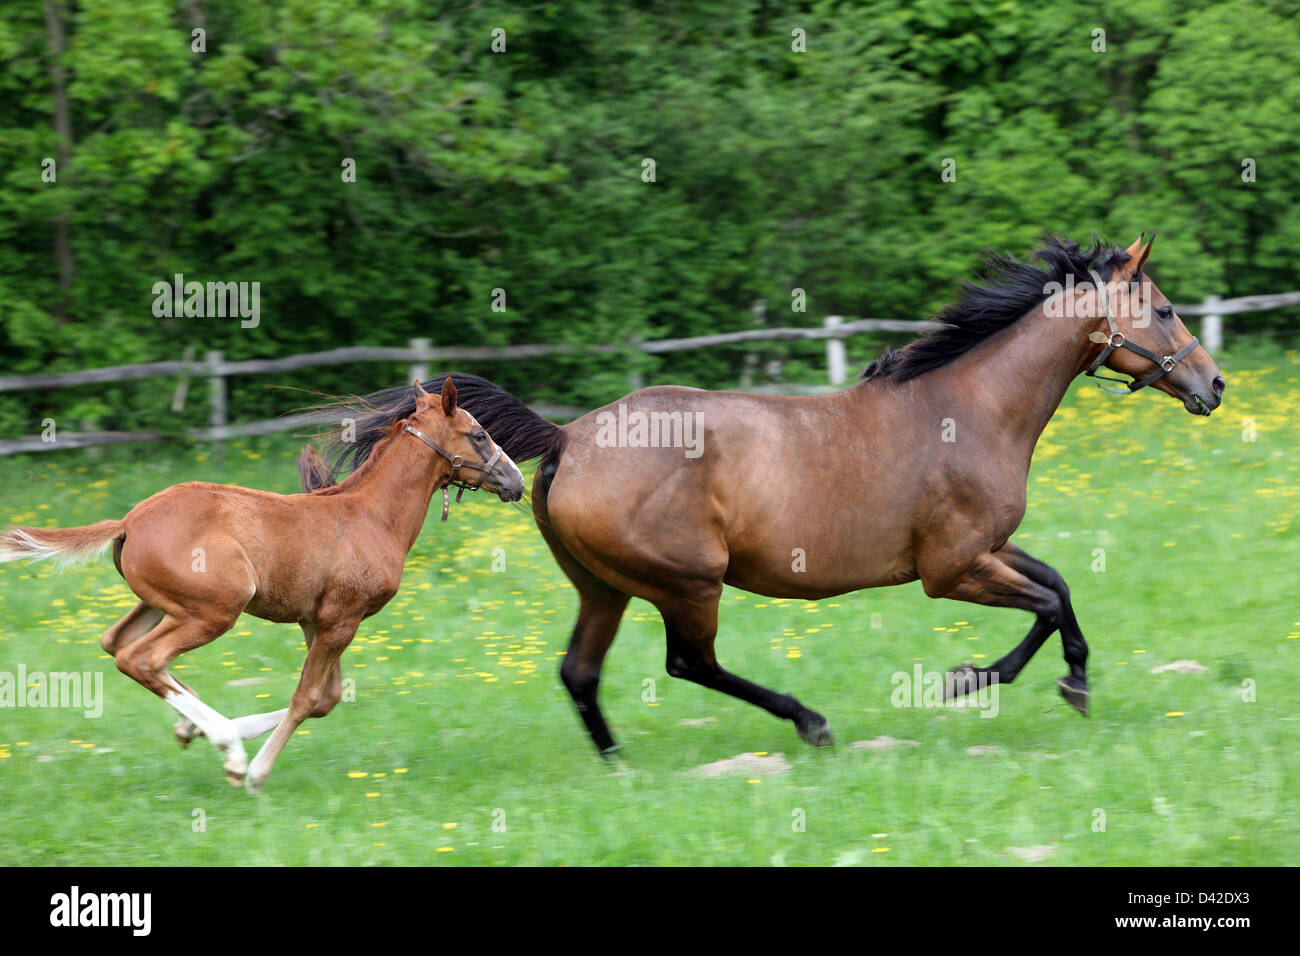 Görlsdorf, Germany, mare and foal galloping in the pasture Stock Photo